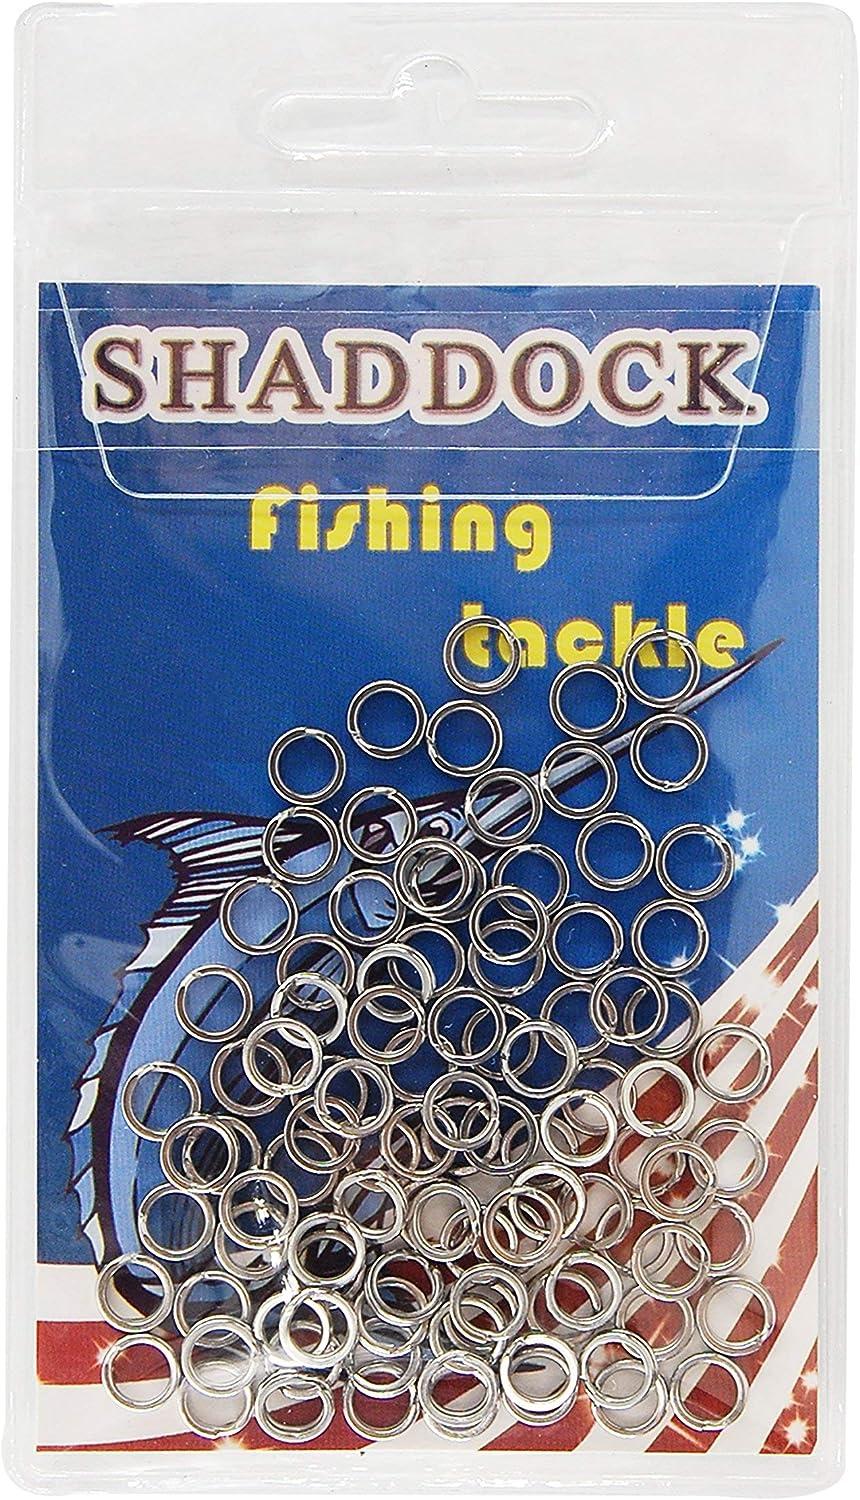 Suyin 50Pcs Stainless Steel Fishing Split Rings Fishing Tackle Ring Chain  Fishing Lures Connector Flat Split Rings 